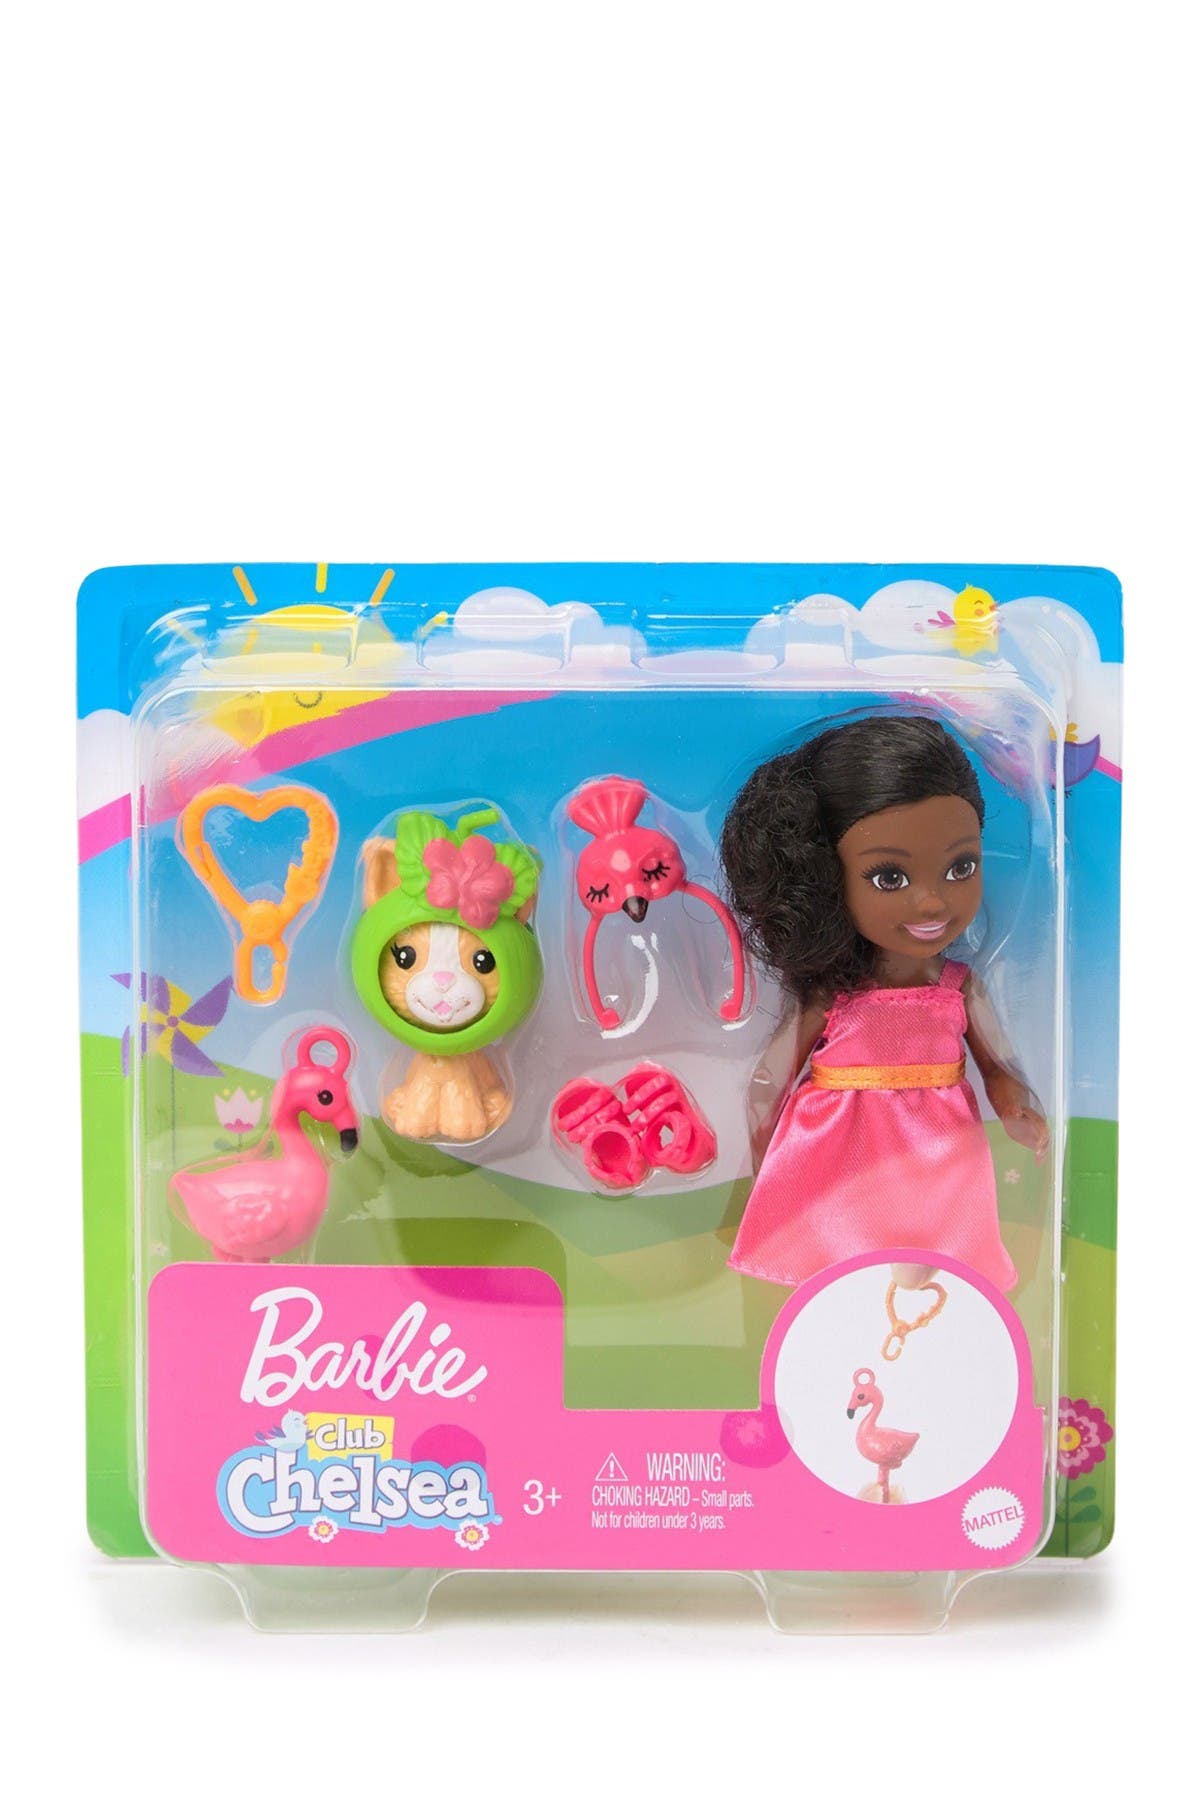 Mattel Barbie(r)club Chelsea(tm) Dress-up Doll In Flamingo Costume 6" Brunette With Pet Kitten And Accessor